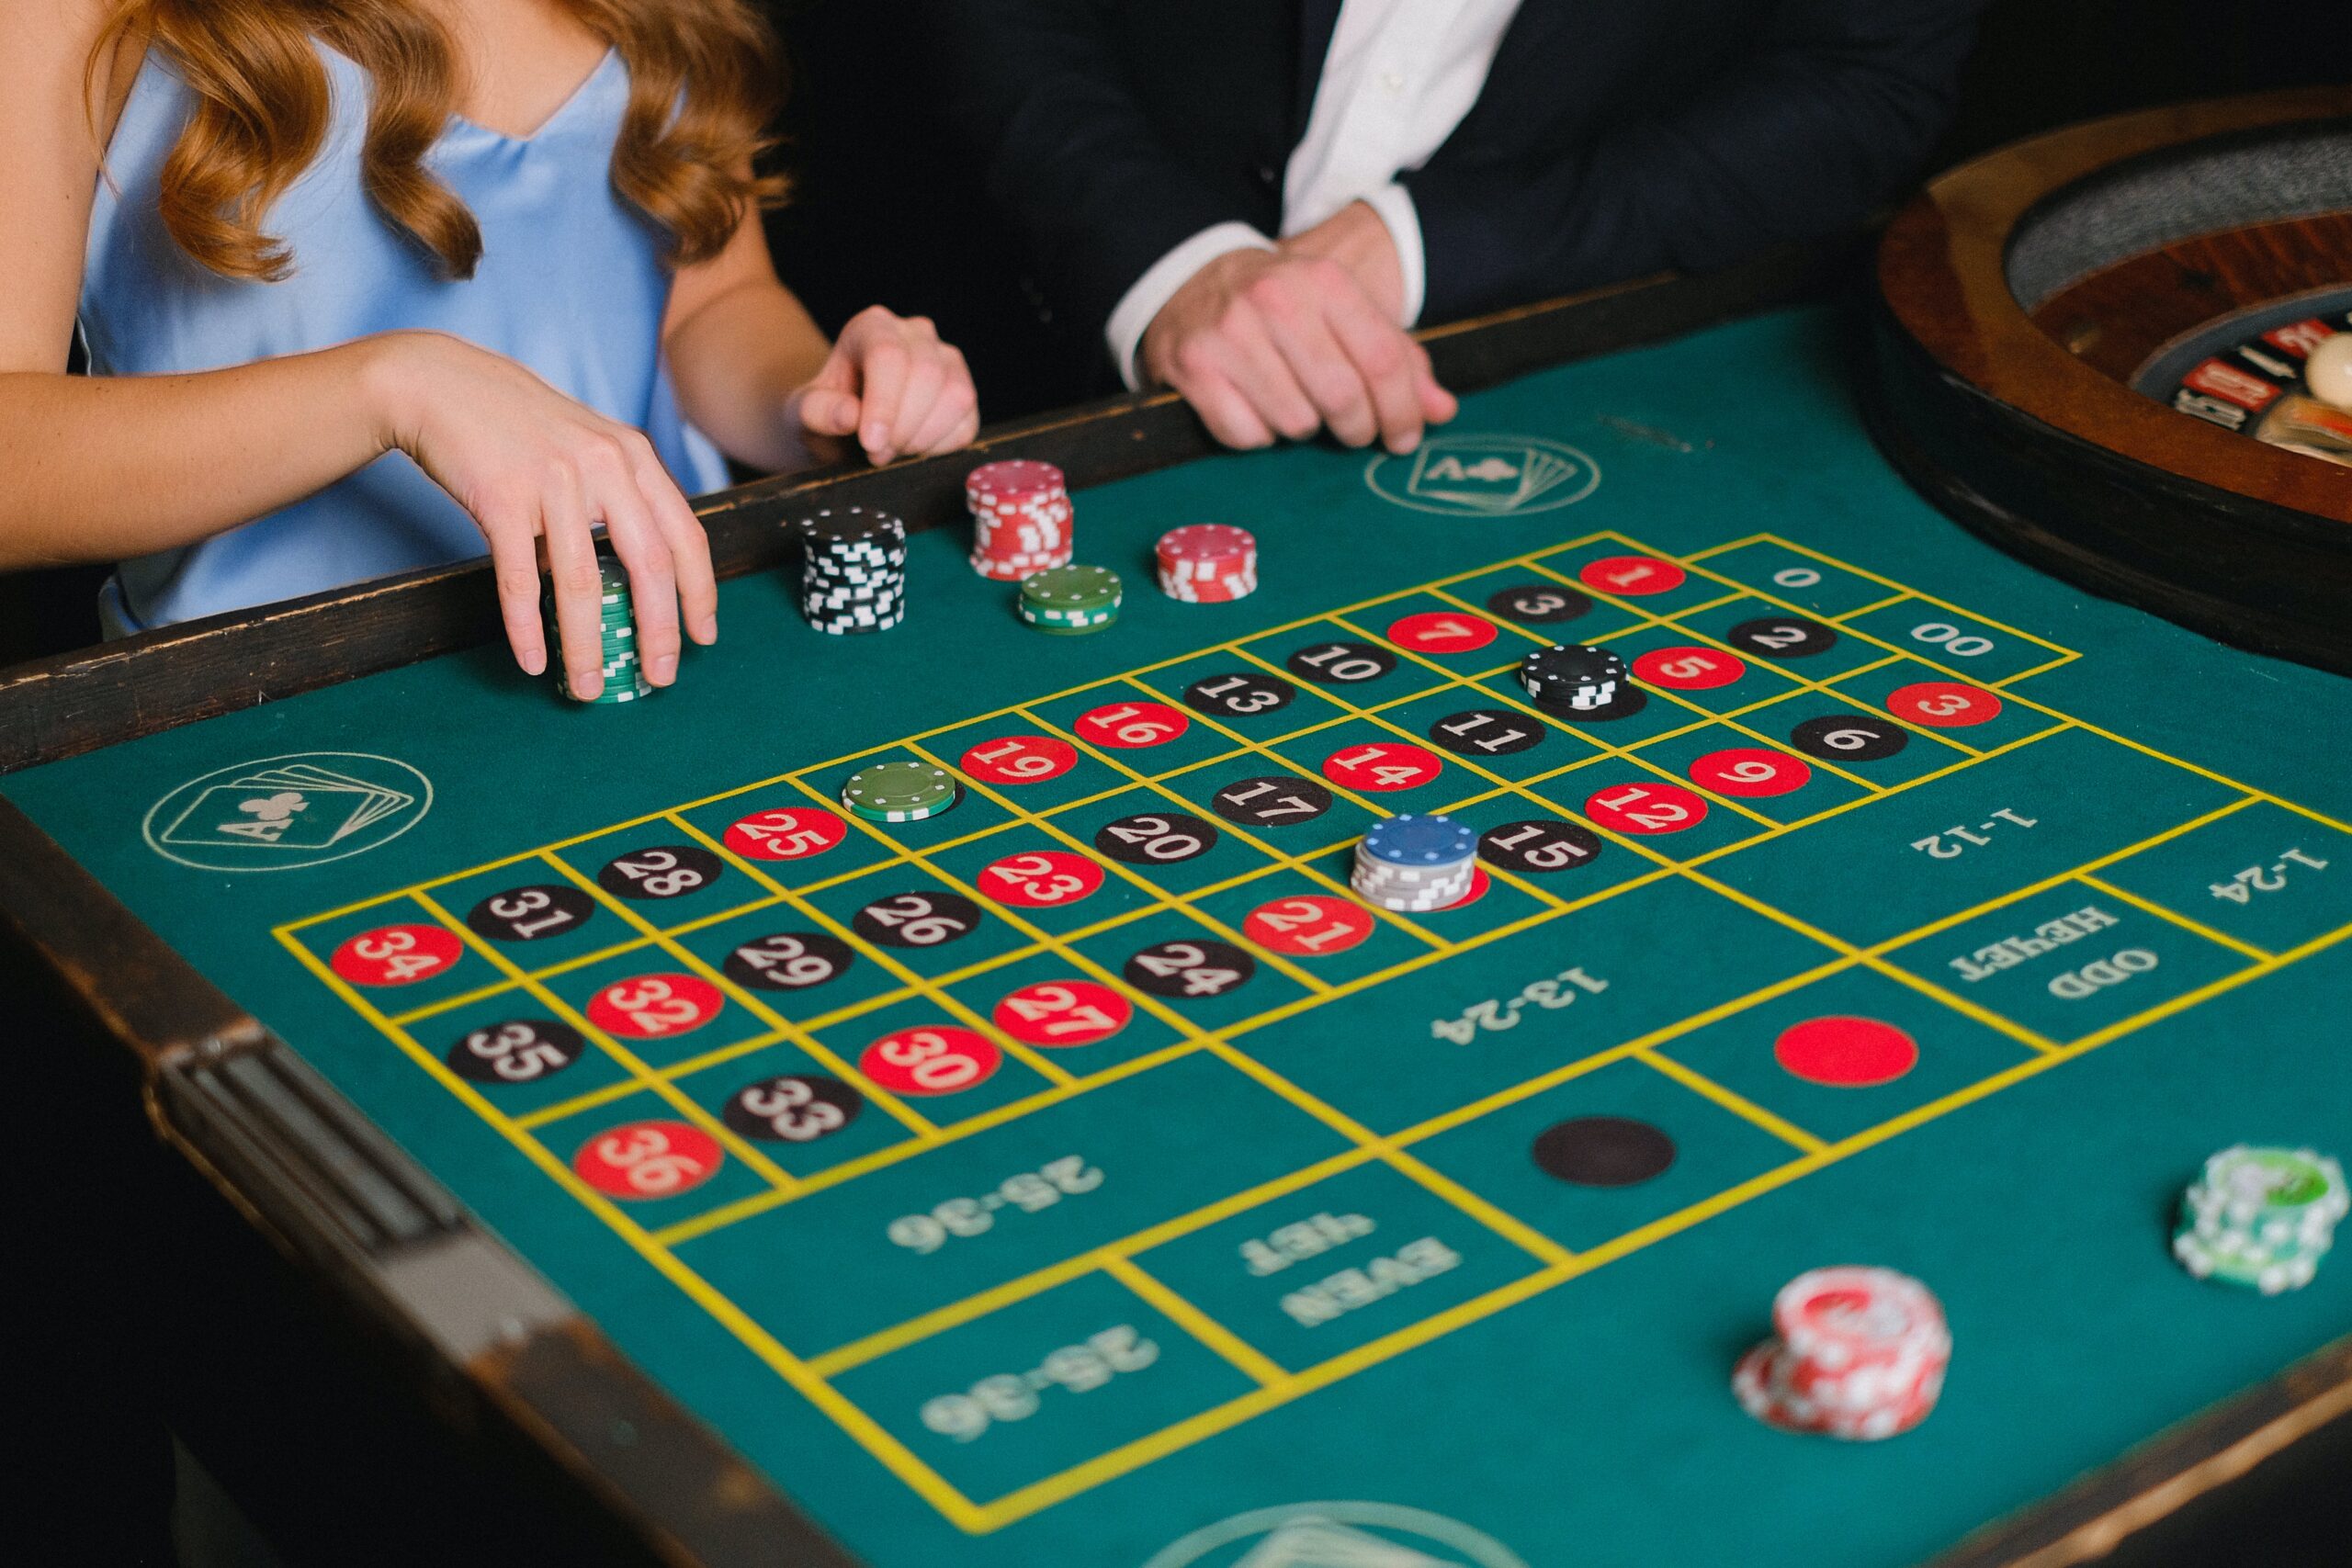 Roulette is a popular lottery game in casinos